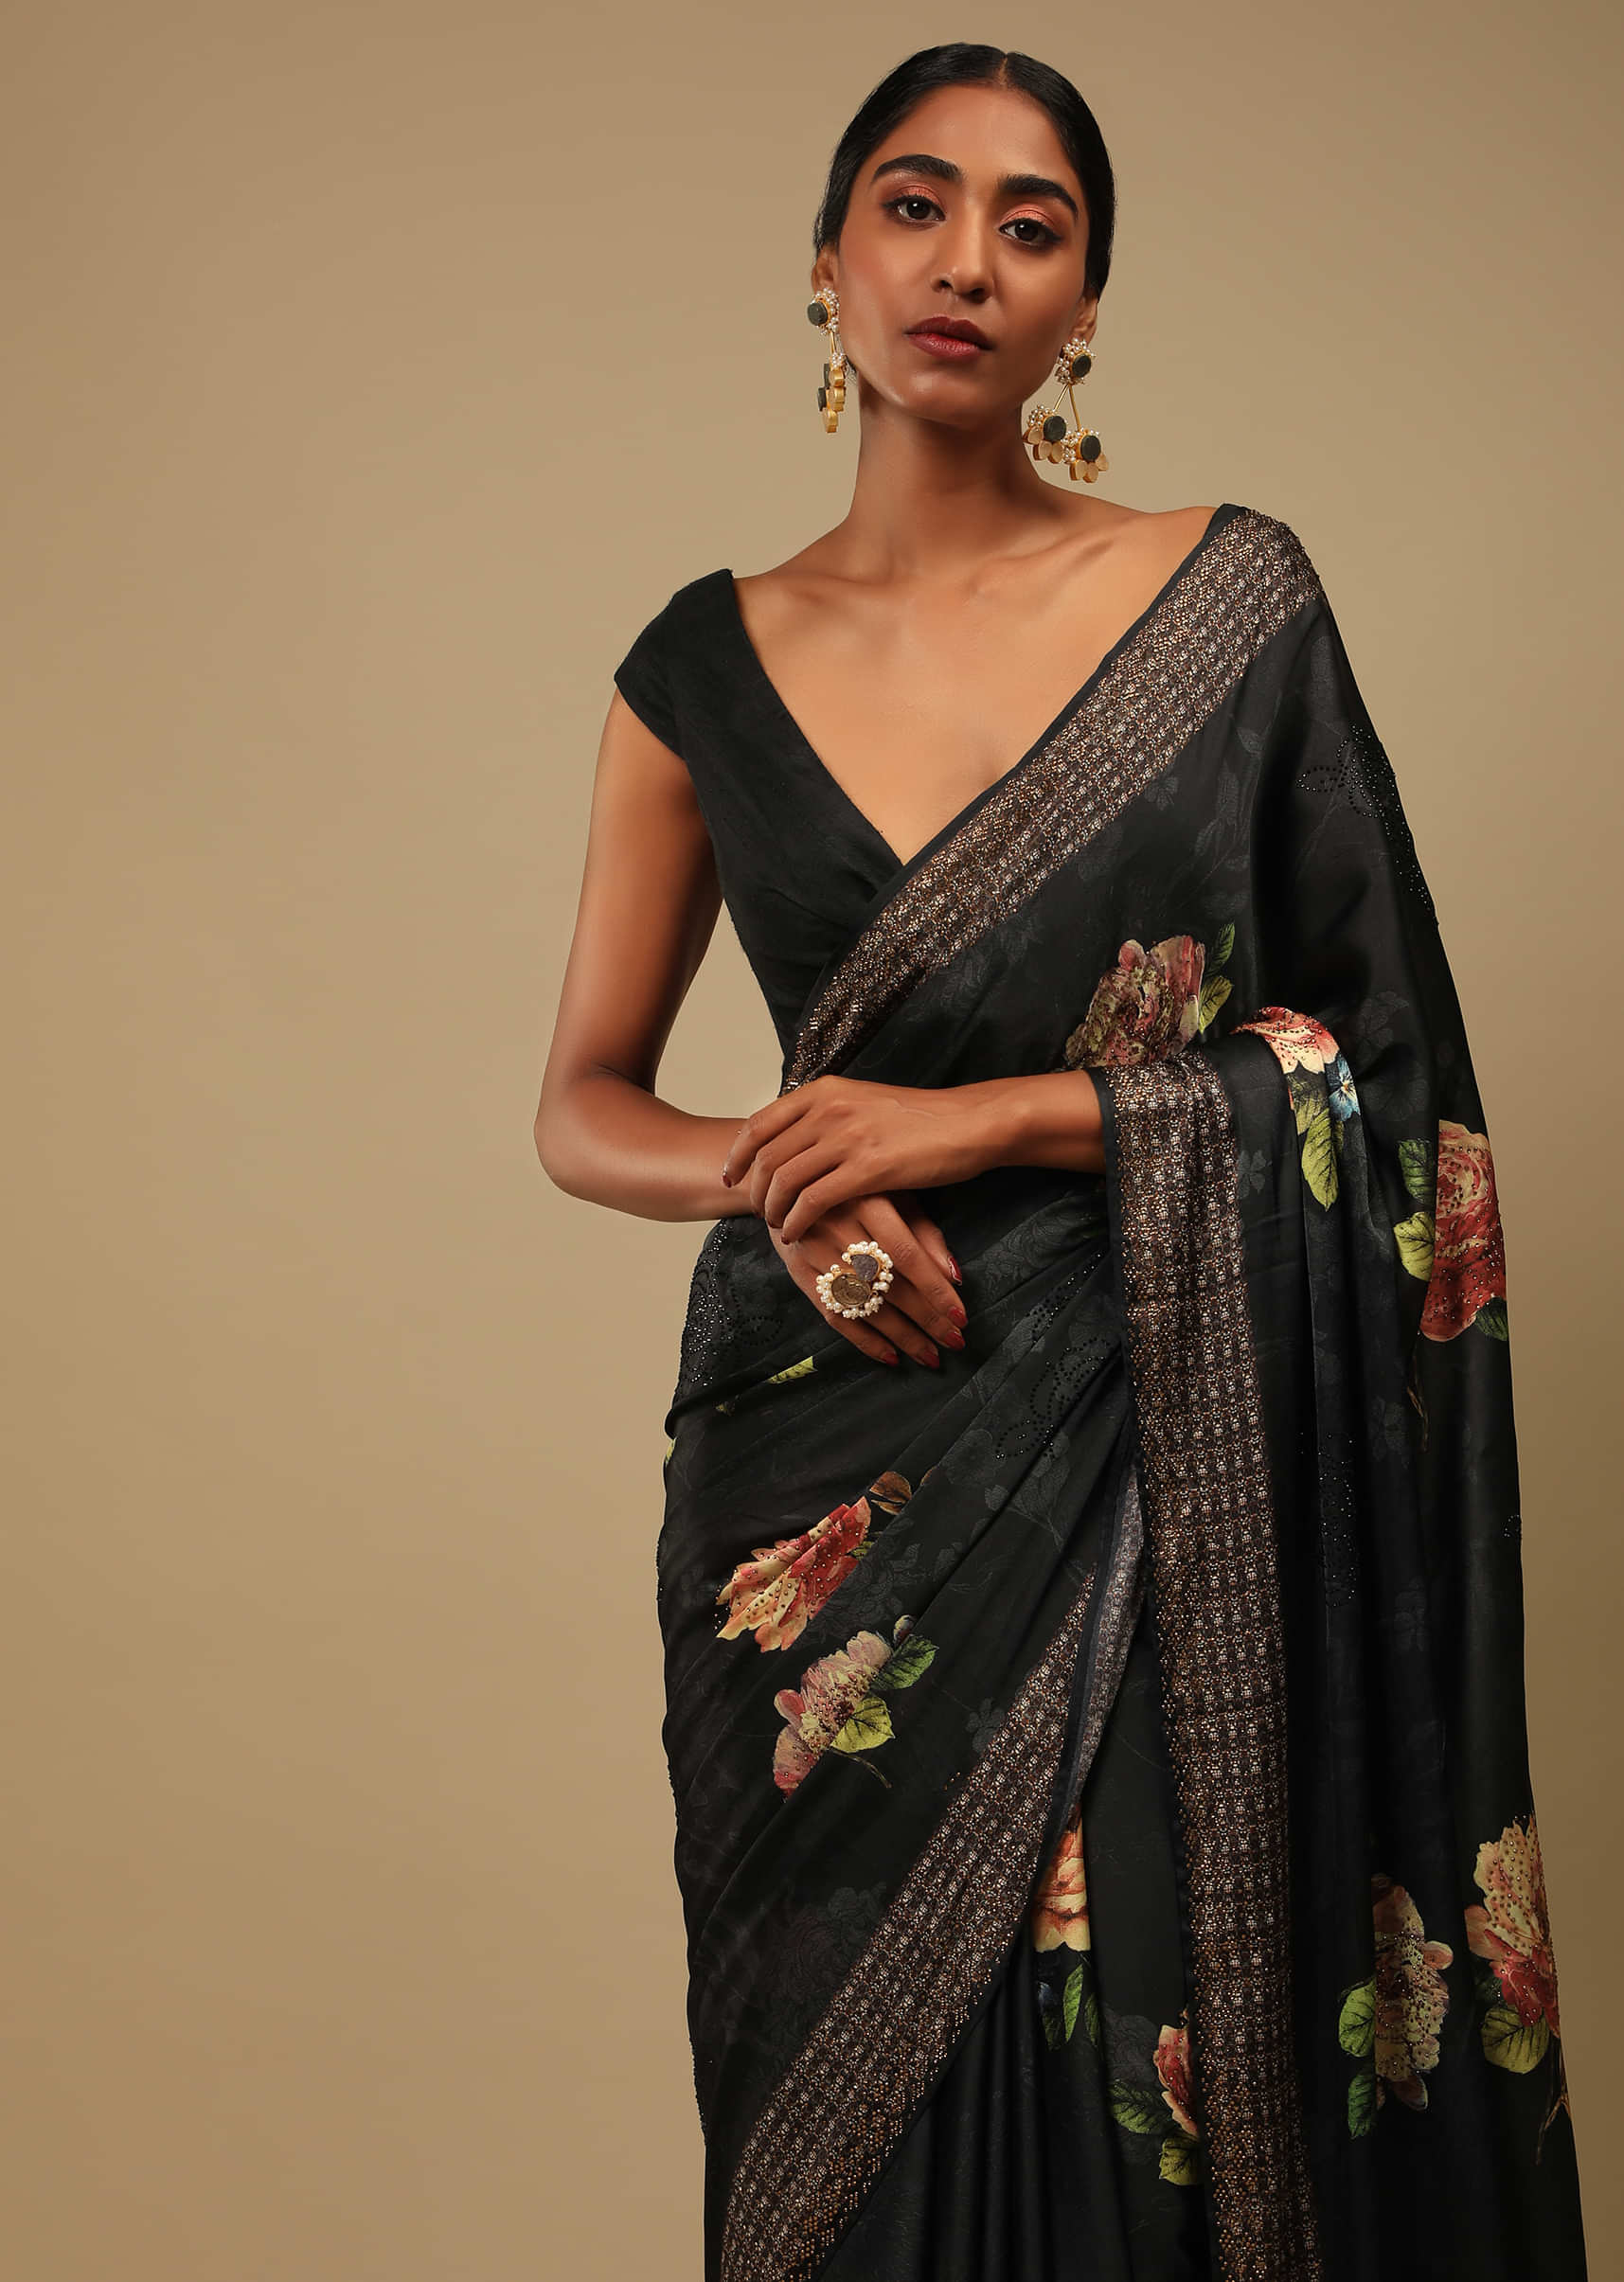 Ash Black Saree In Satin Crepe With Rose Print And Kundan Detailed Border Along With Unstitched Blouse  